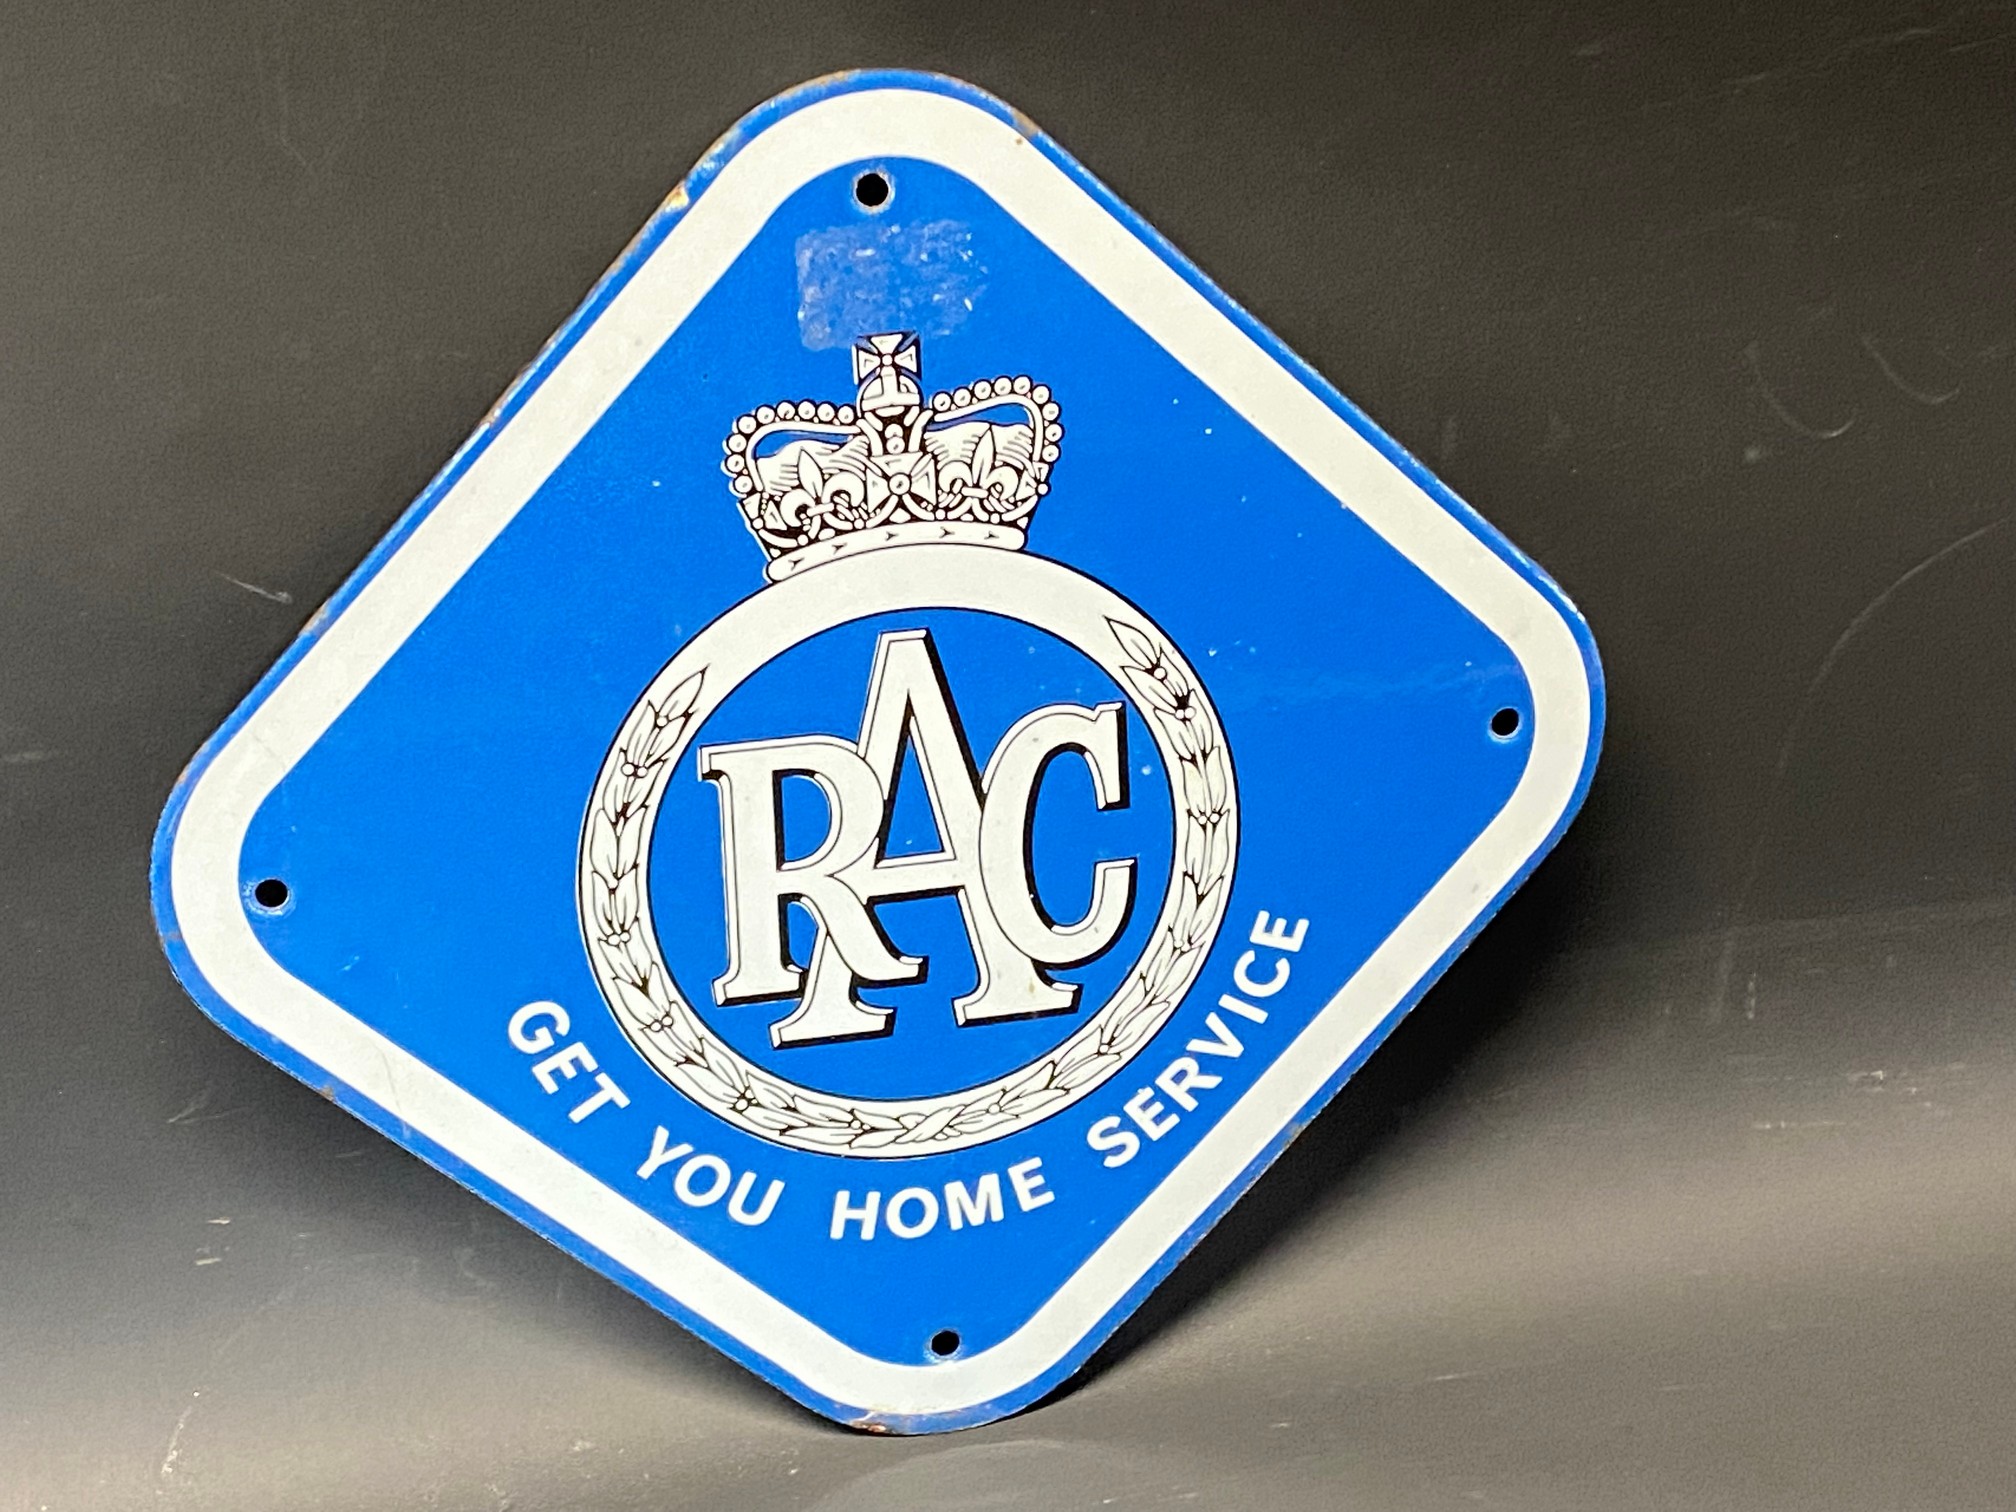 A small RAC Get-you-home-service lozenge shaped enamel sign, 11 x 11".